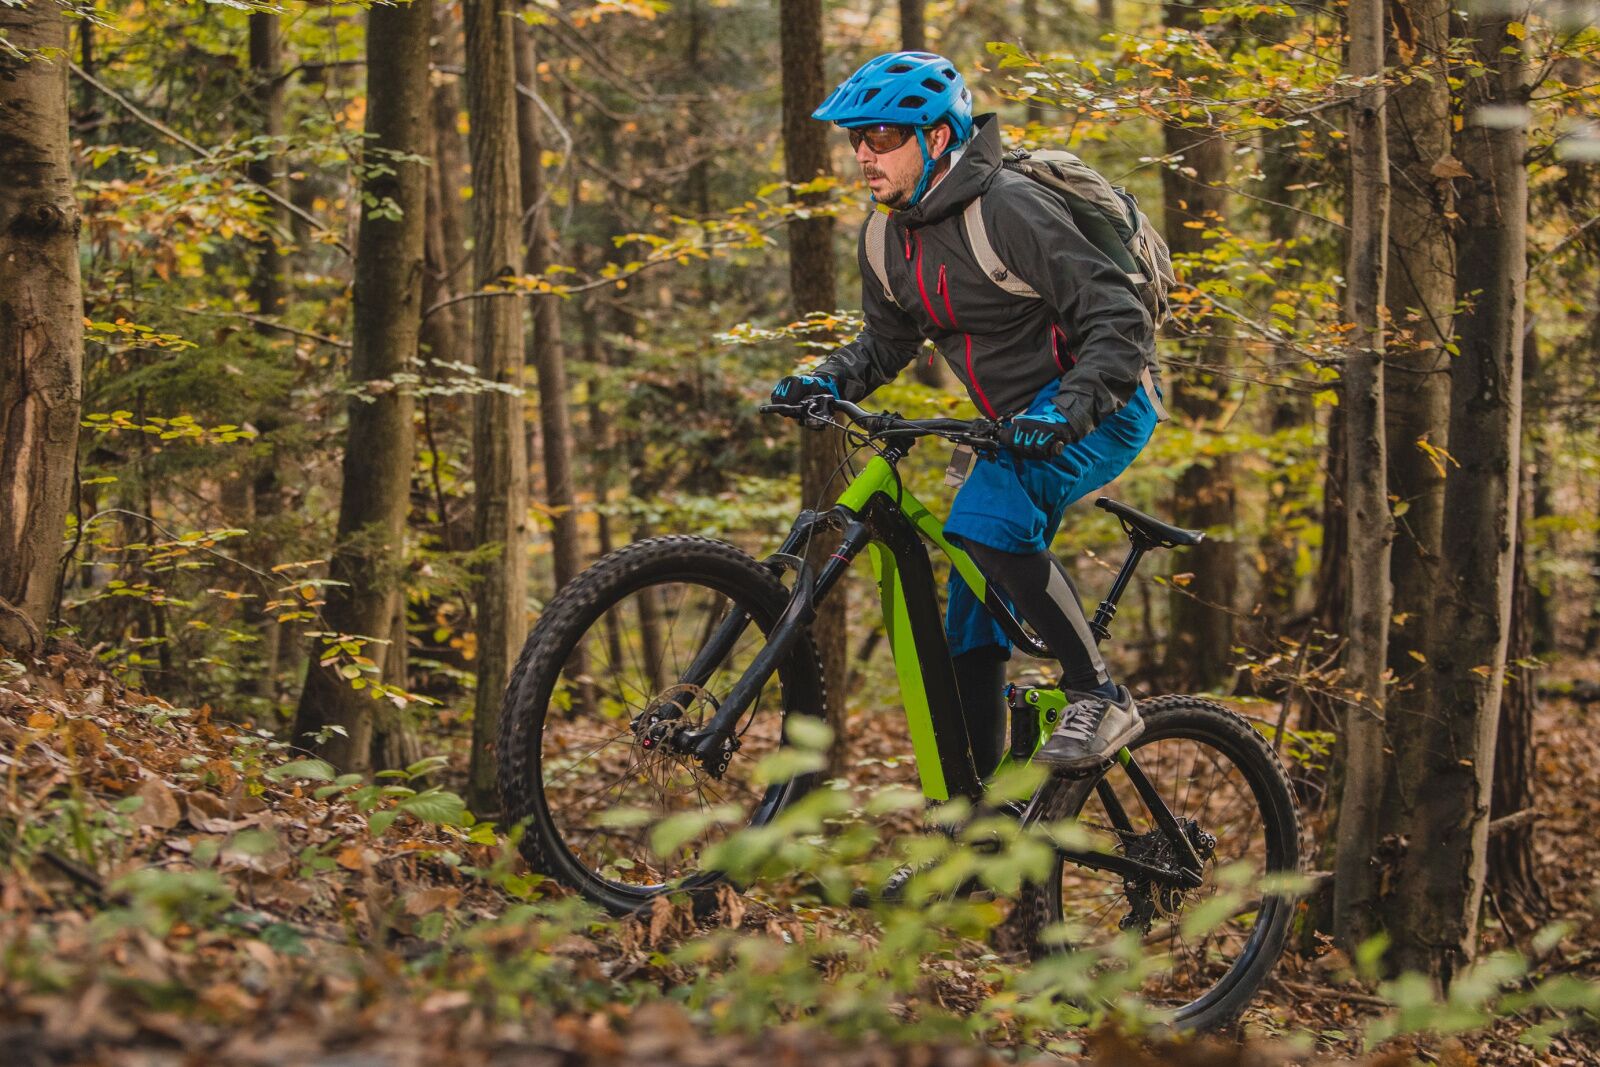 e-bikes on trails - pedaling uphill